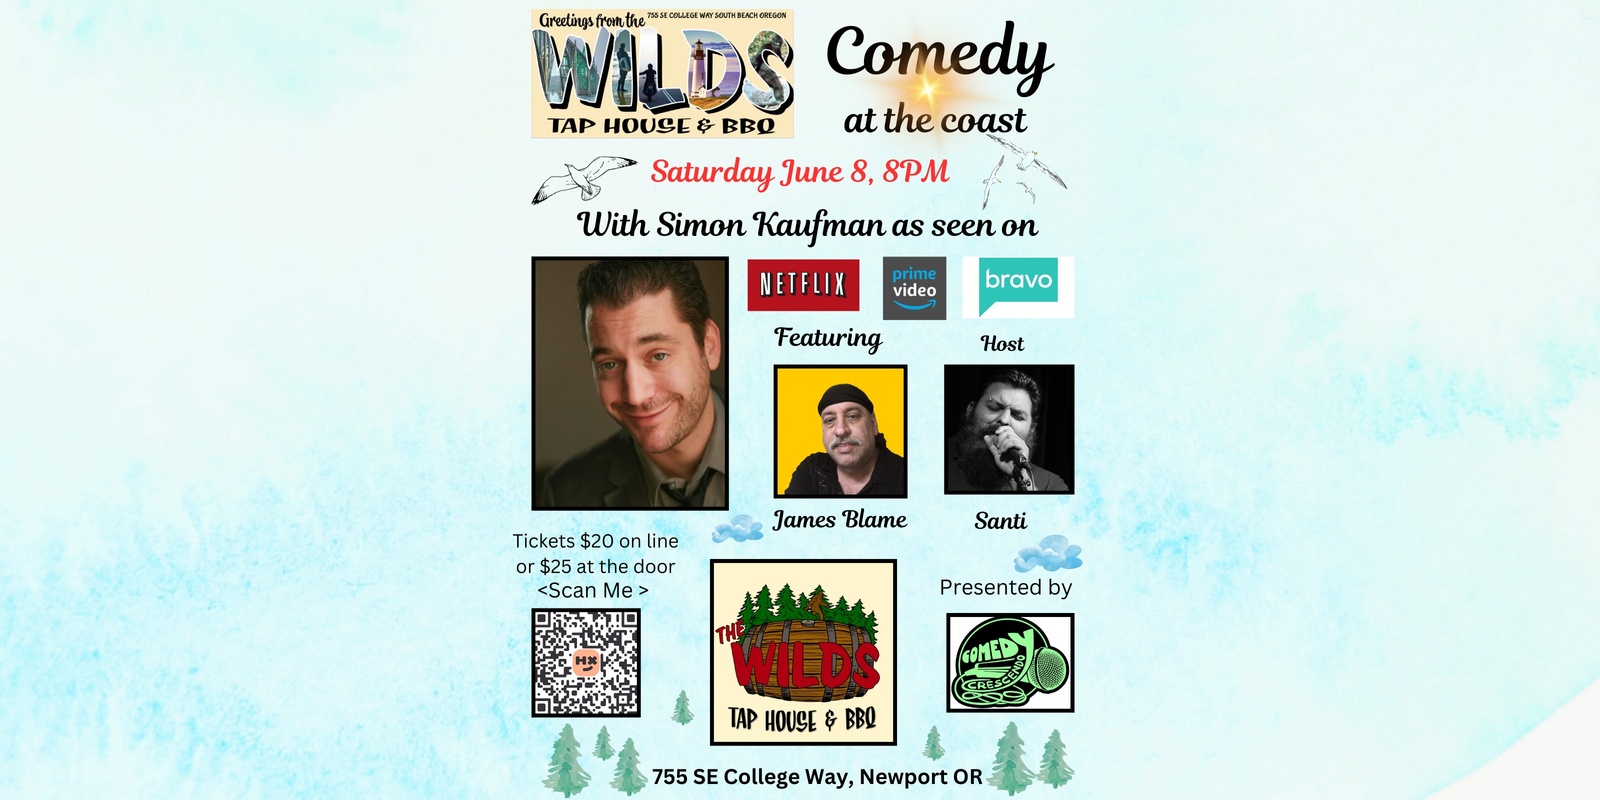 Banner image for Comedy at The Wilds Taphouse